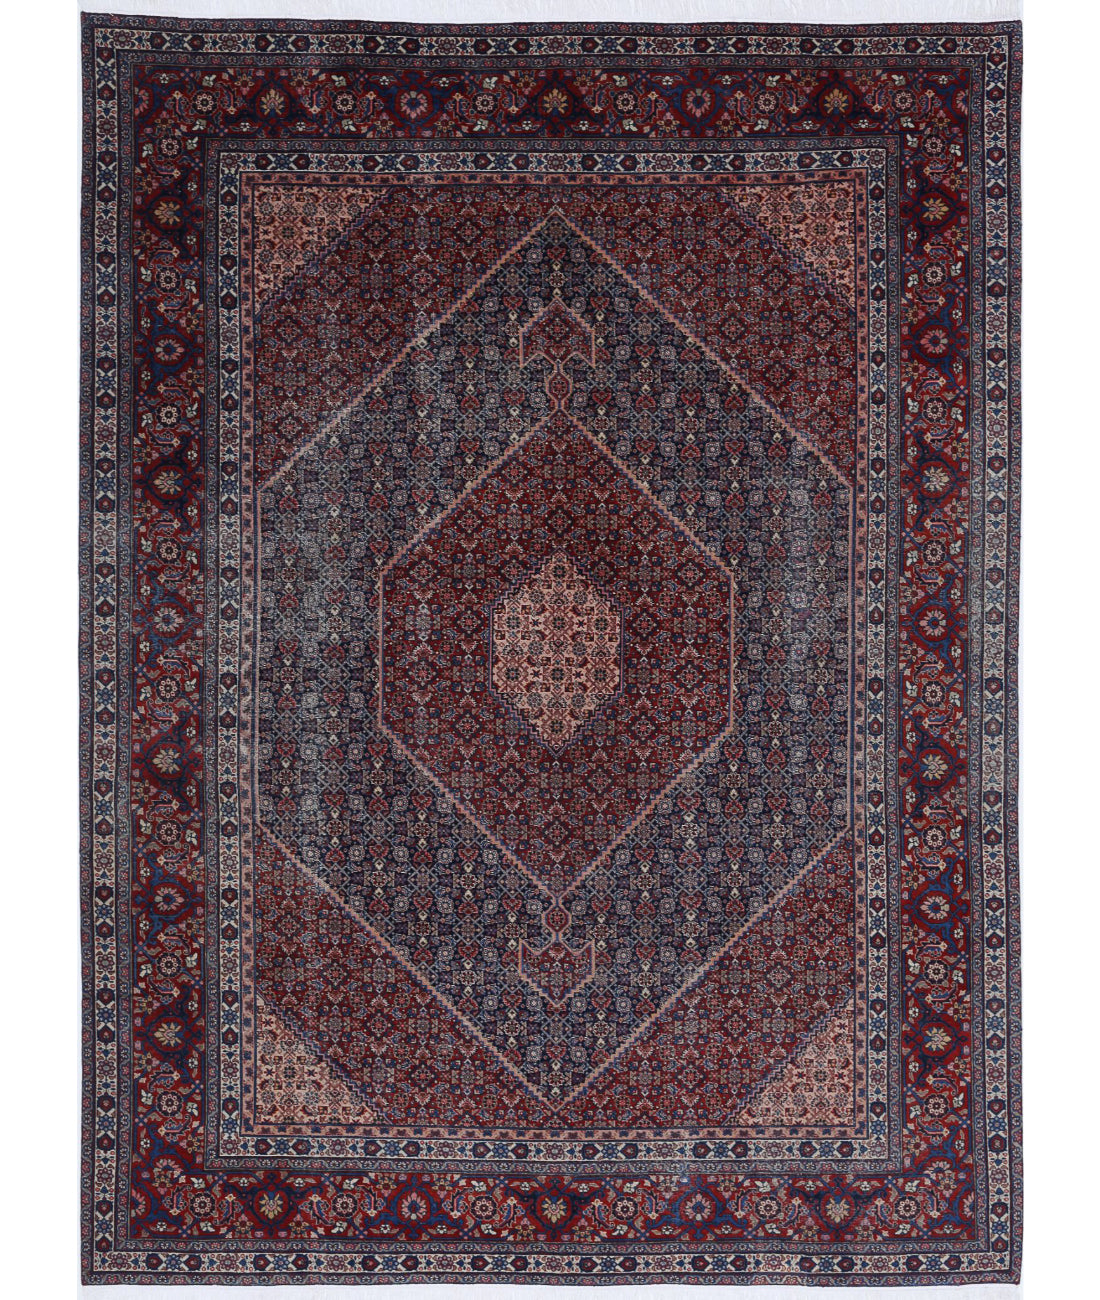 Hand Knotted Vintage Persian Tabriz Wool Rug - 9'0'' x 12'4'' 9'0'' x 12'4'' (270 X 370) / Blue / Red